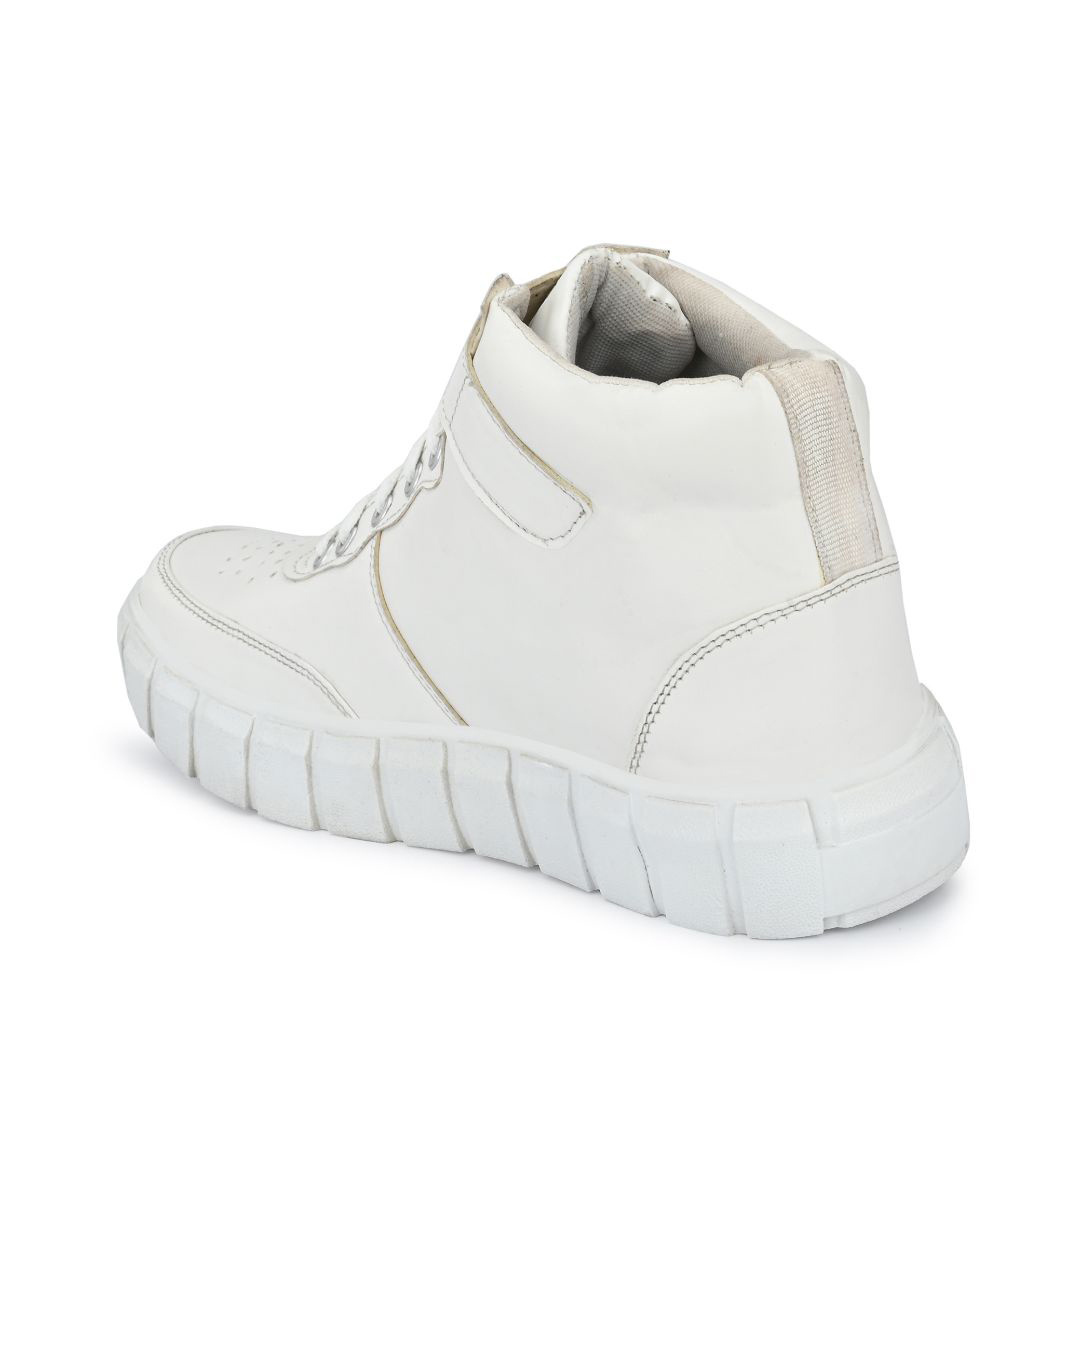 Shop Men's White Lightweight Casual Shoes-Back